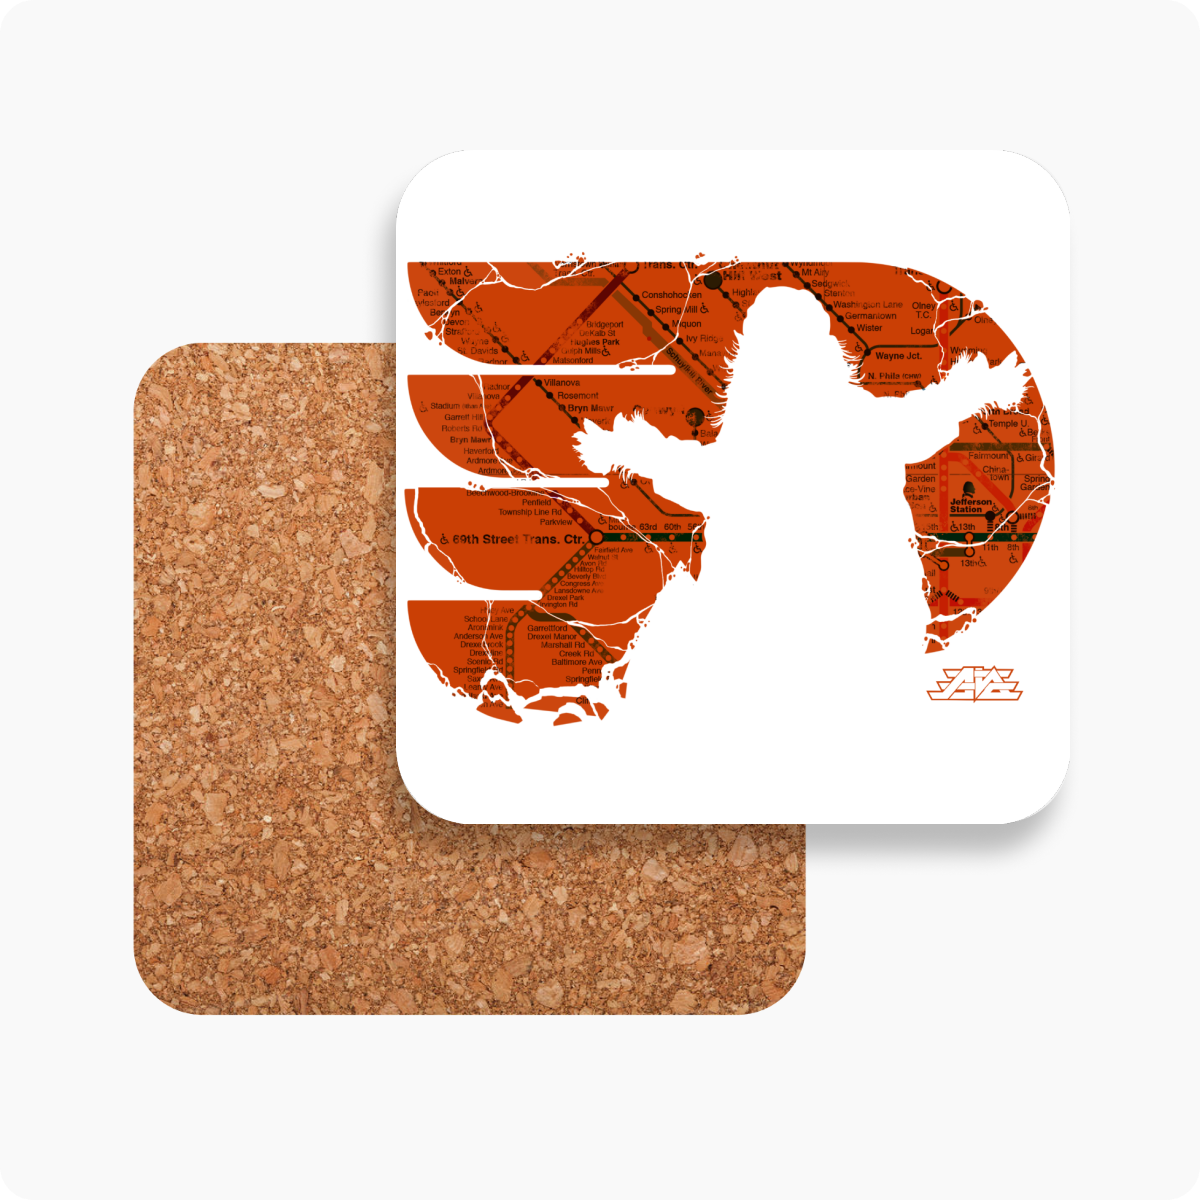 Gritty Oh Yeah Cork and hardwood coasters